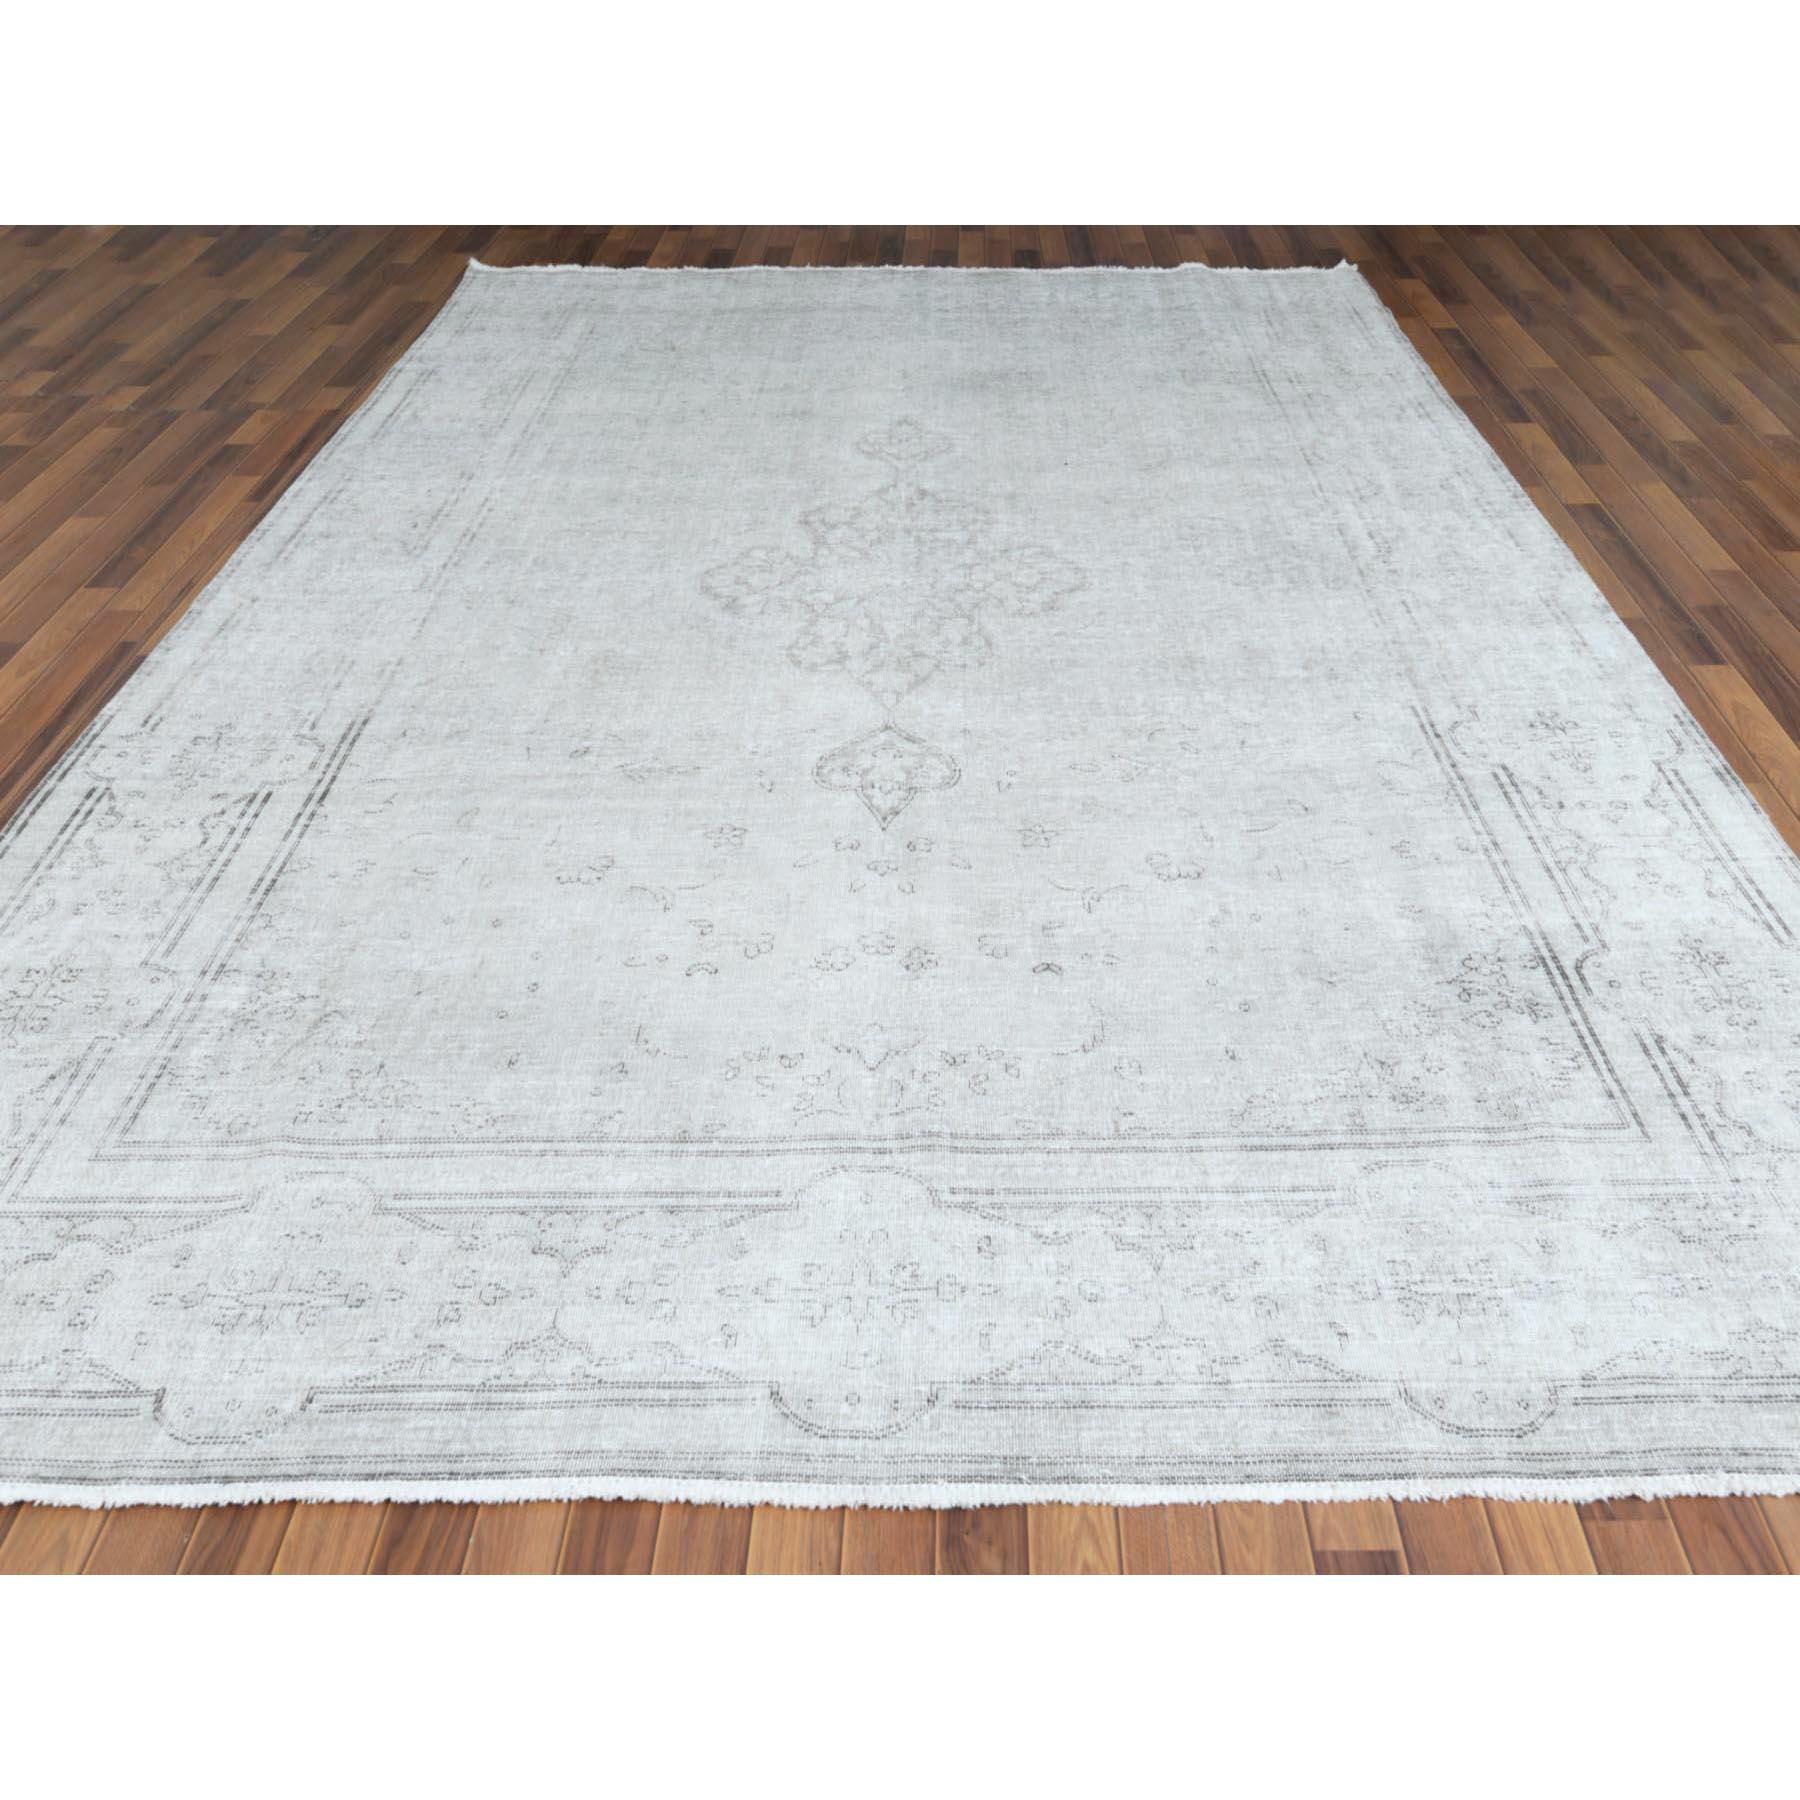 Medieval Gray Overcast Overdyed Worn Down Old Persian Kerman Oriental Rug